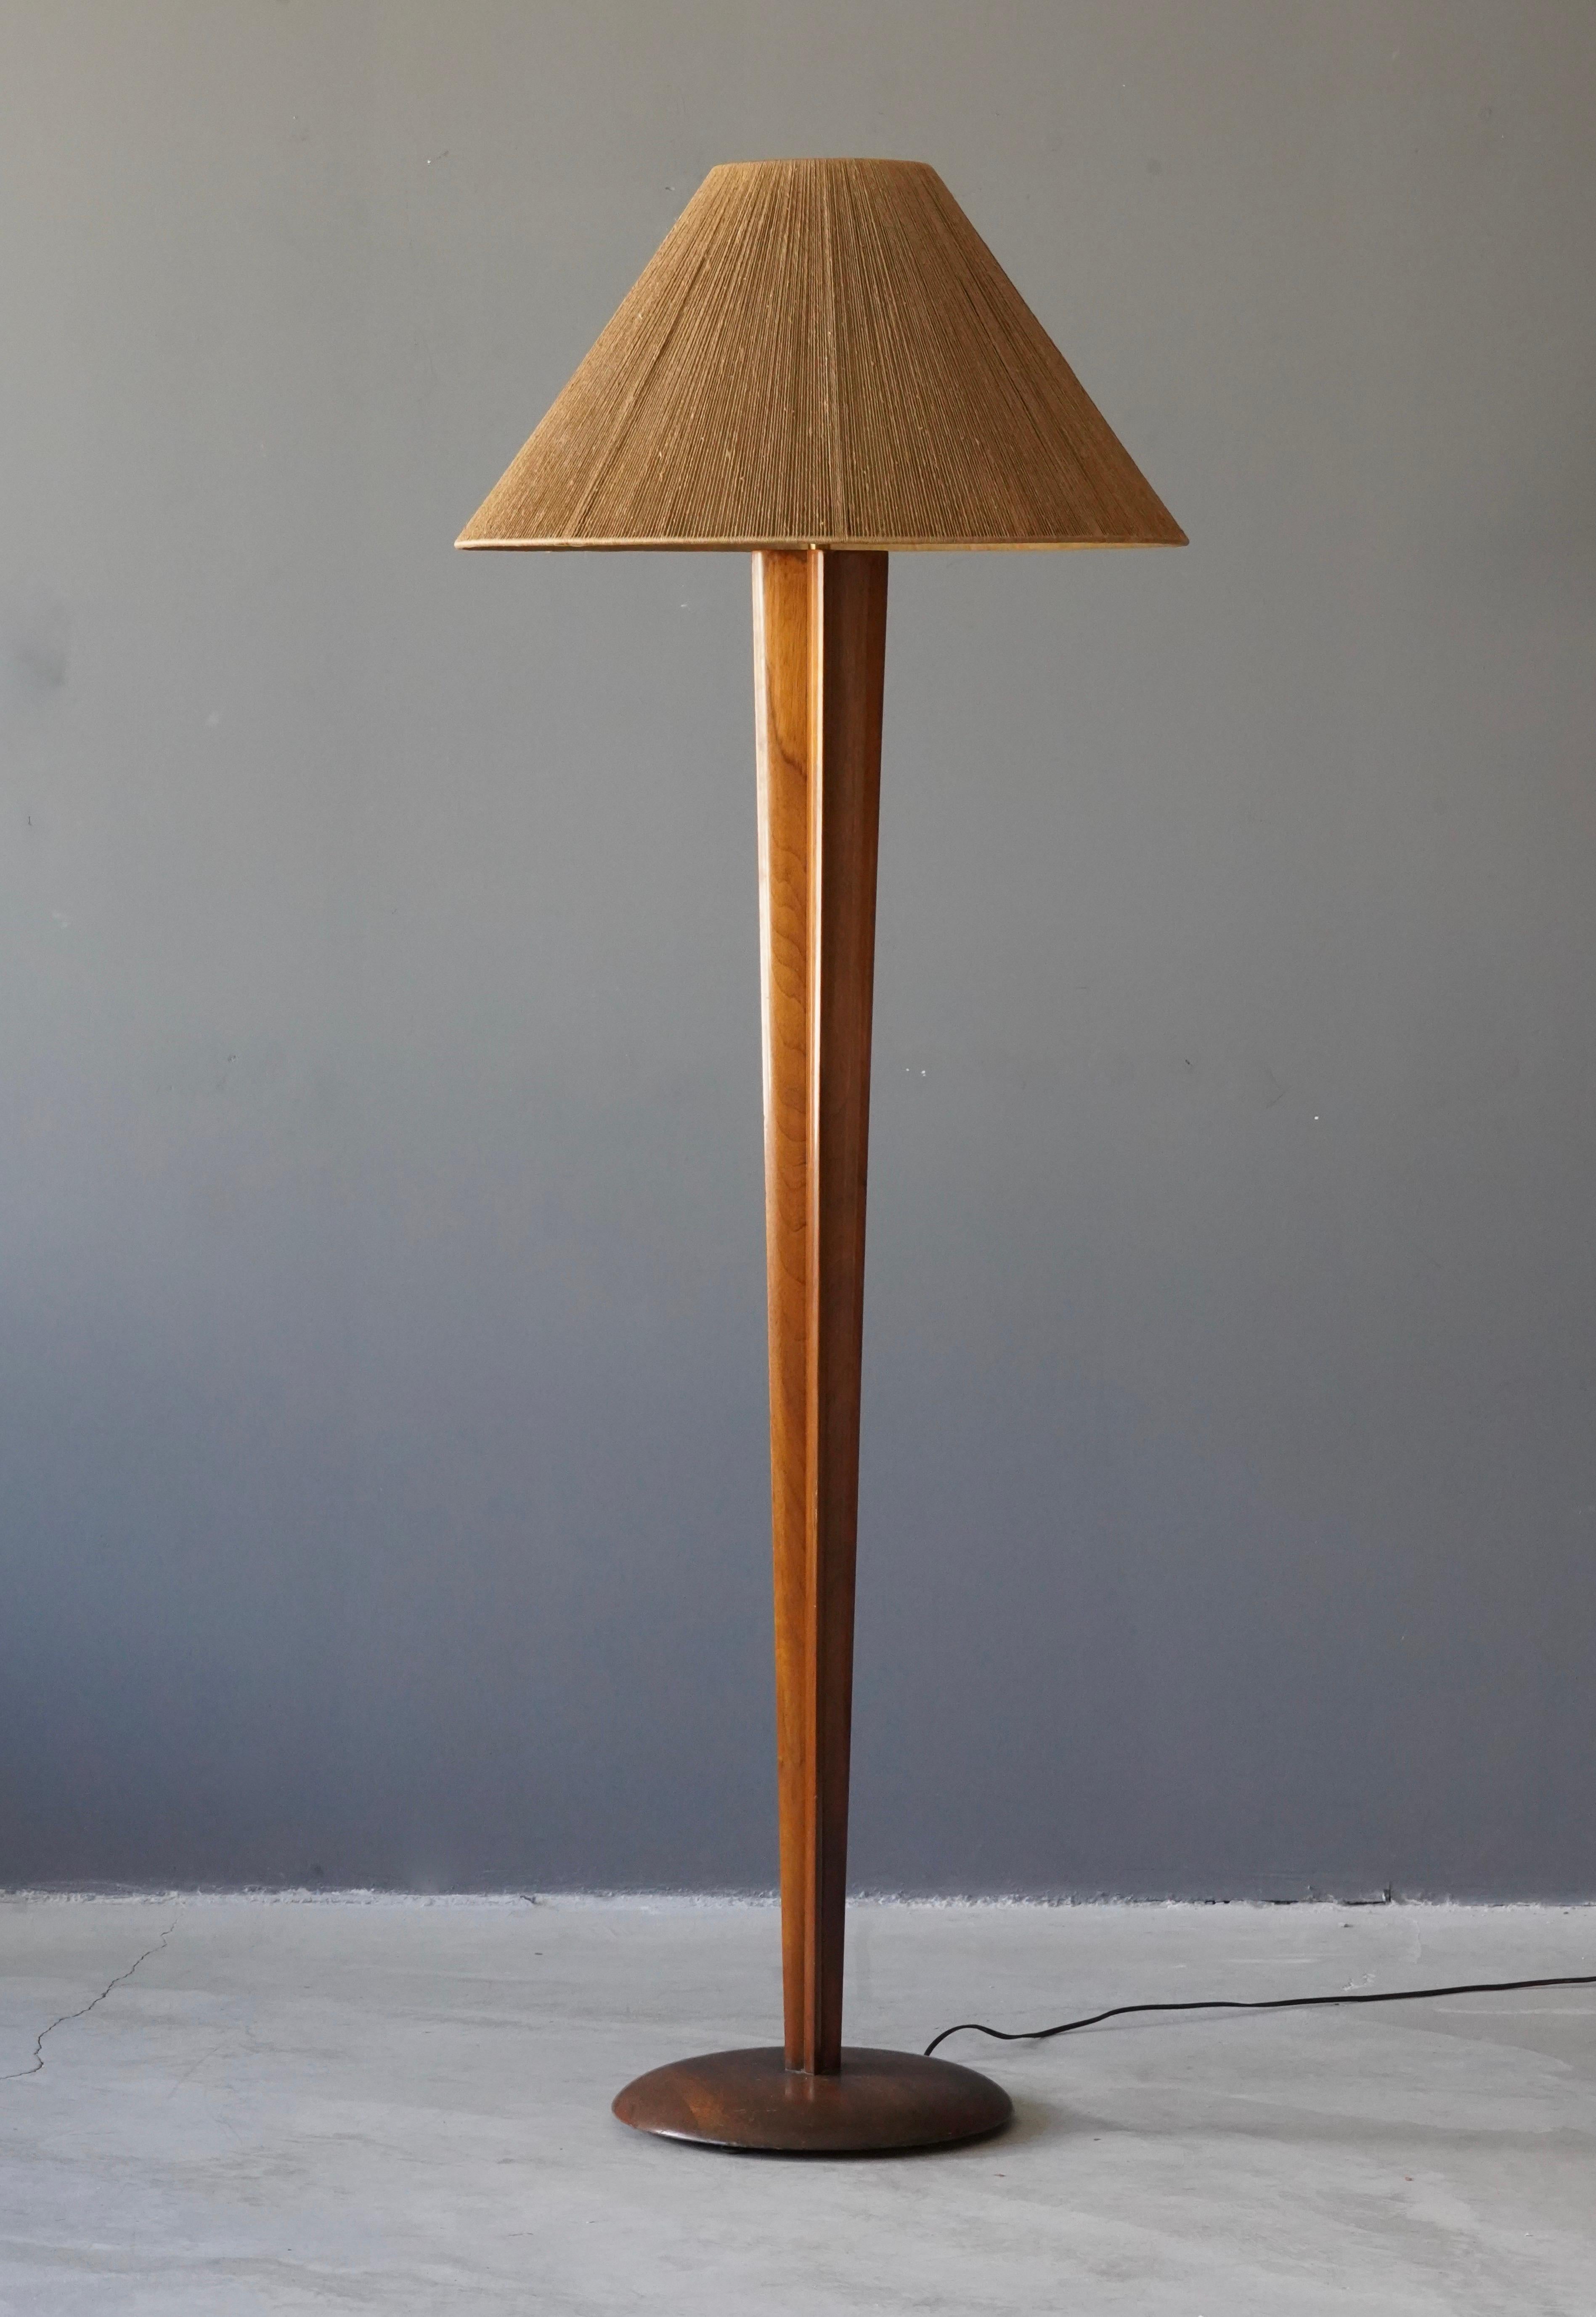 A rare floor lamp designed by Vladimir Kagan. Produced by Kagan-Dreyfus in New York circa 1960s. 

Rod and base is finely carved walnut. Bears its original oversized string shade. 

Other American designers of the era include T.H. Robsjohn